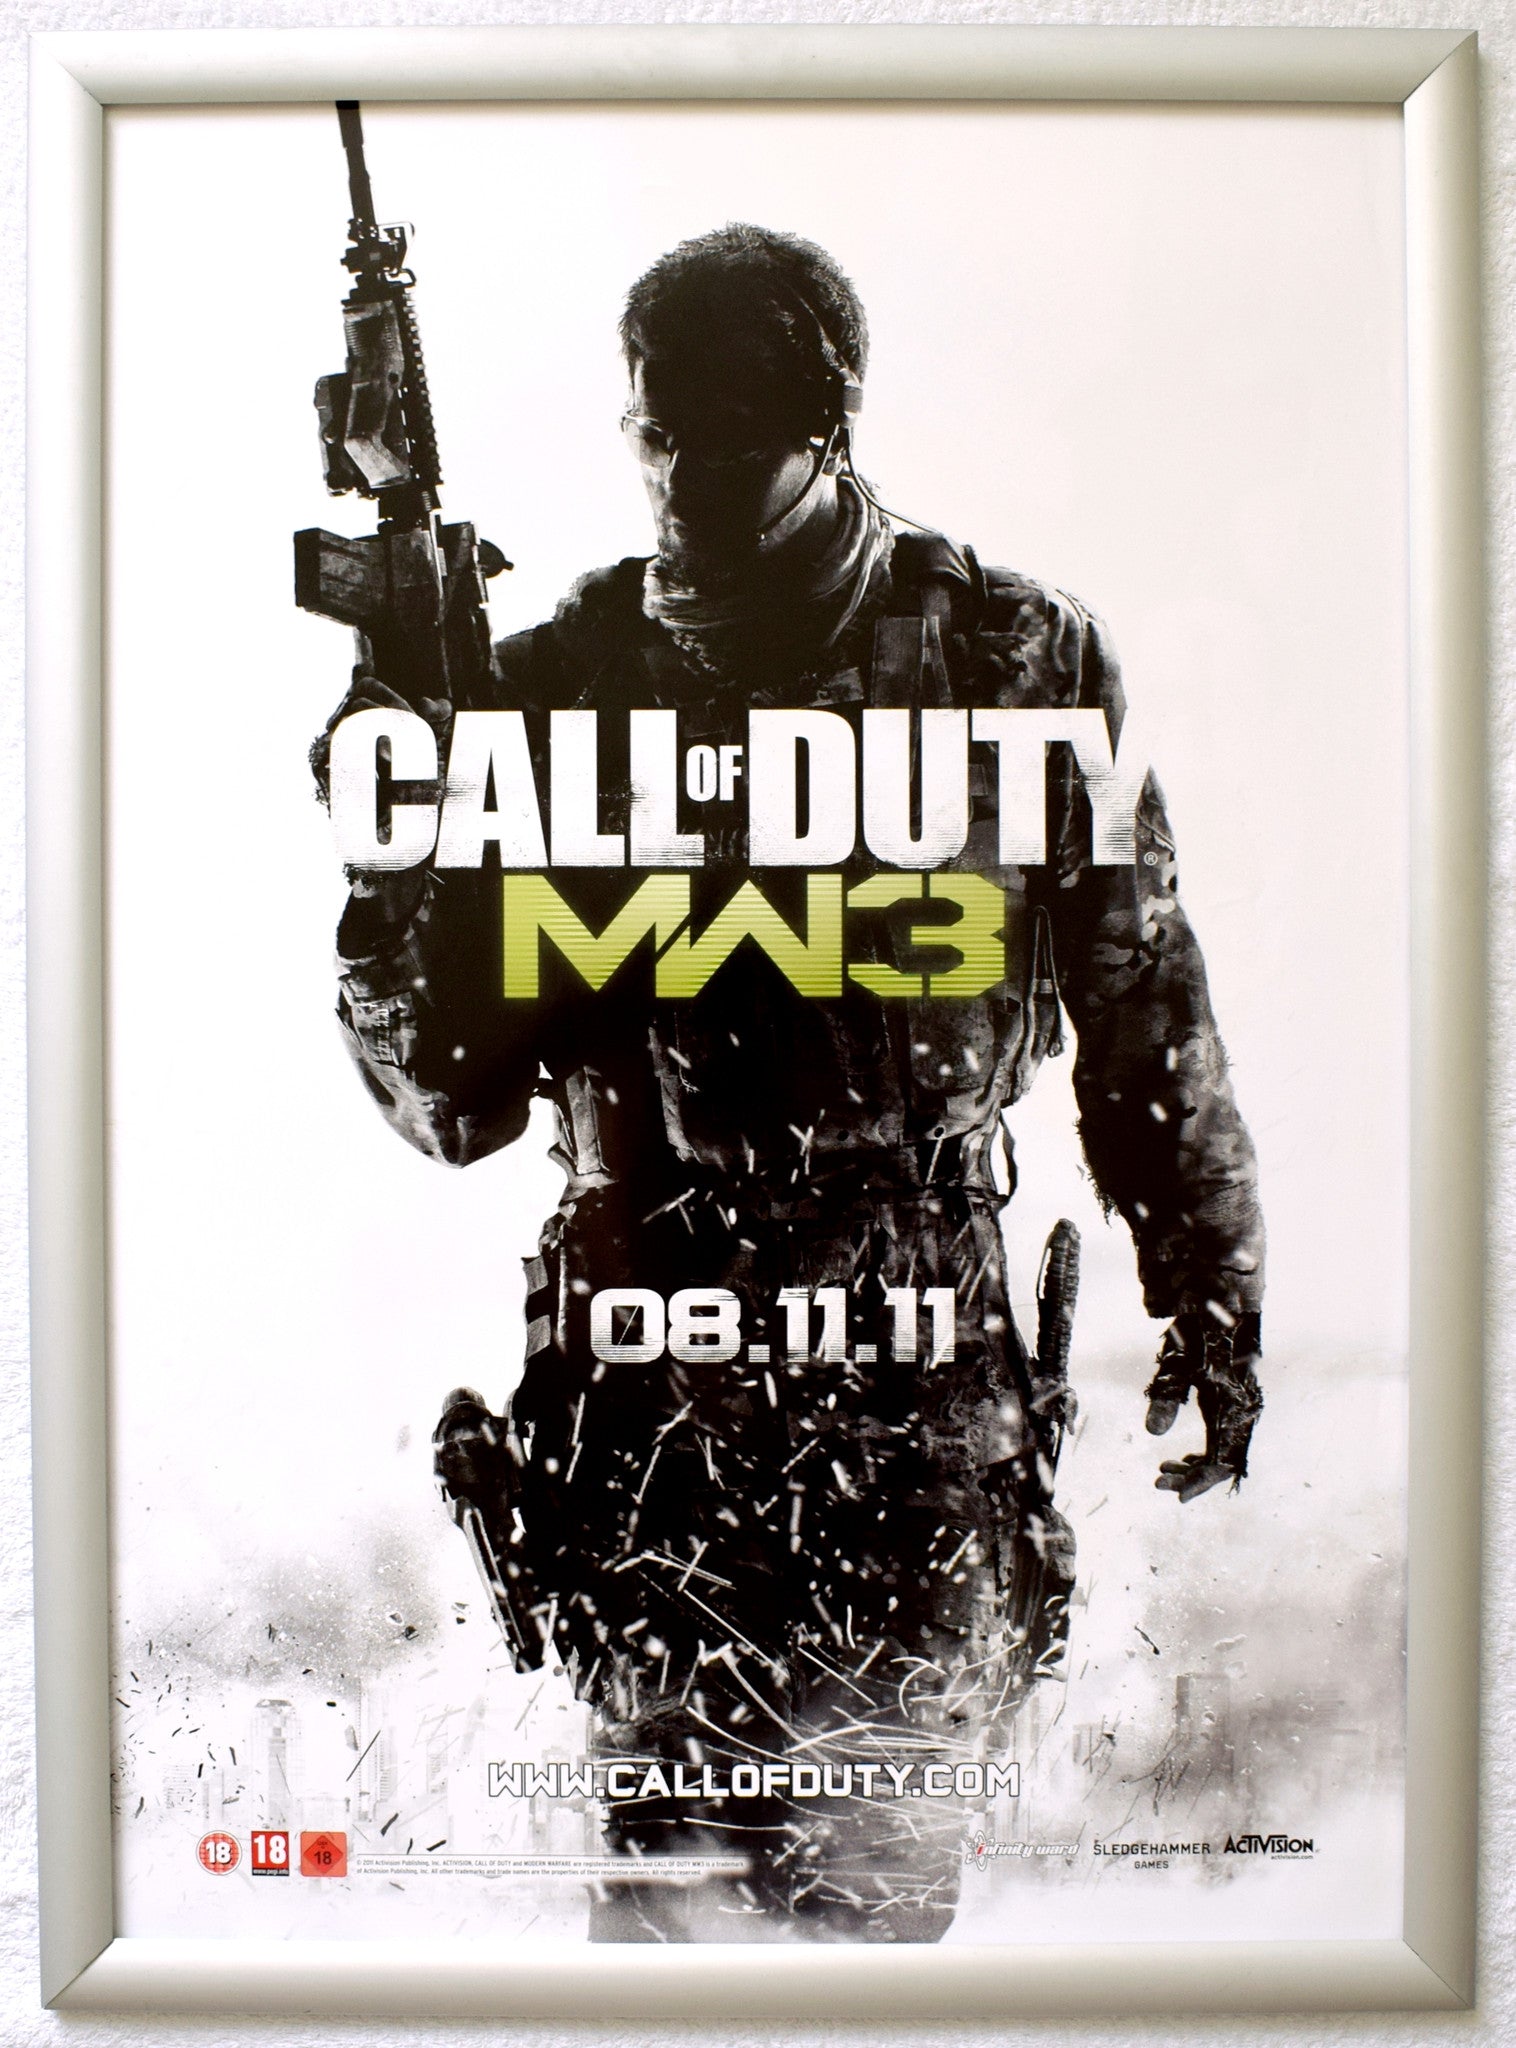 Call of Duty Modern Warfare 3 (A2) Promotional Poster #2